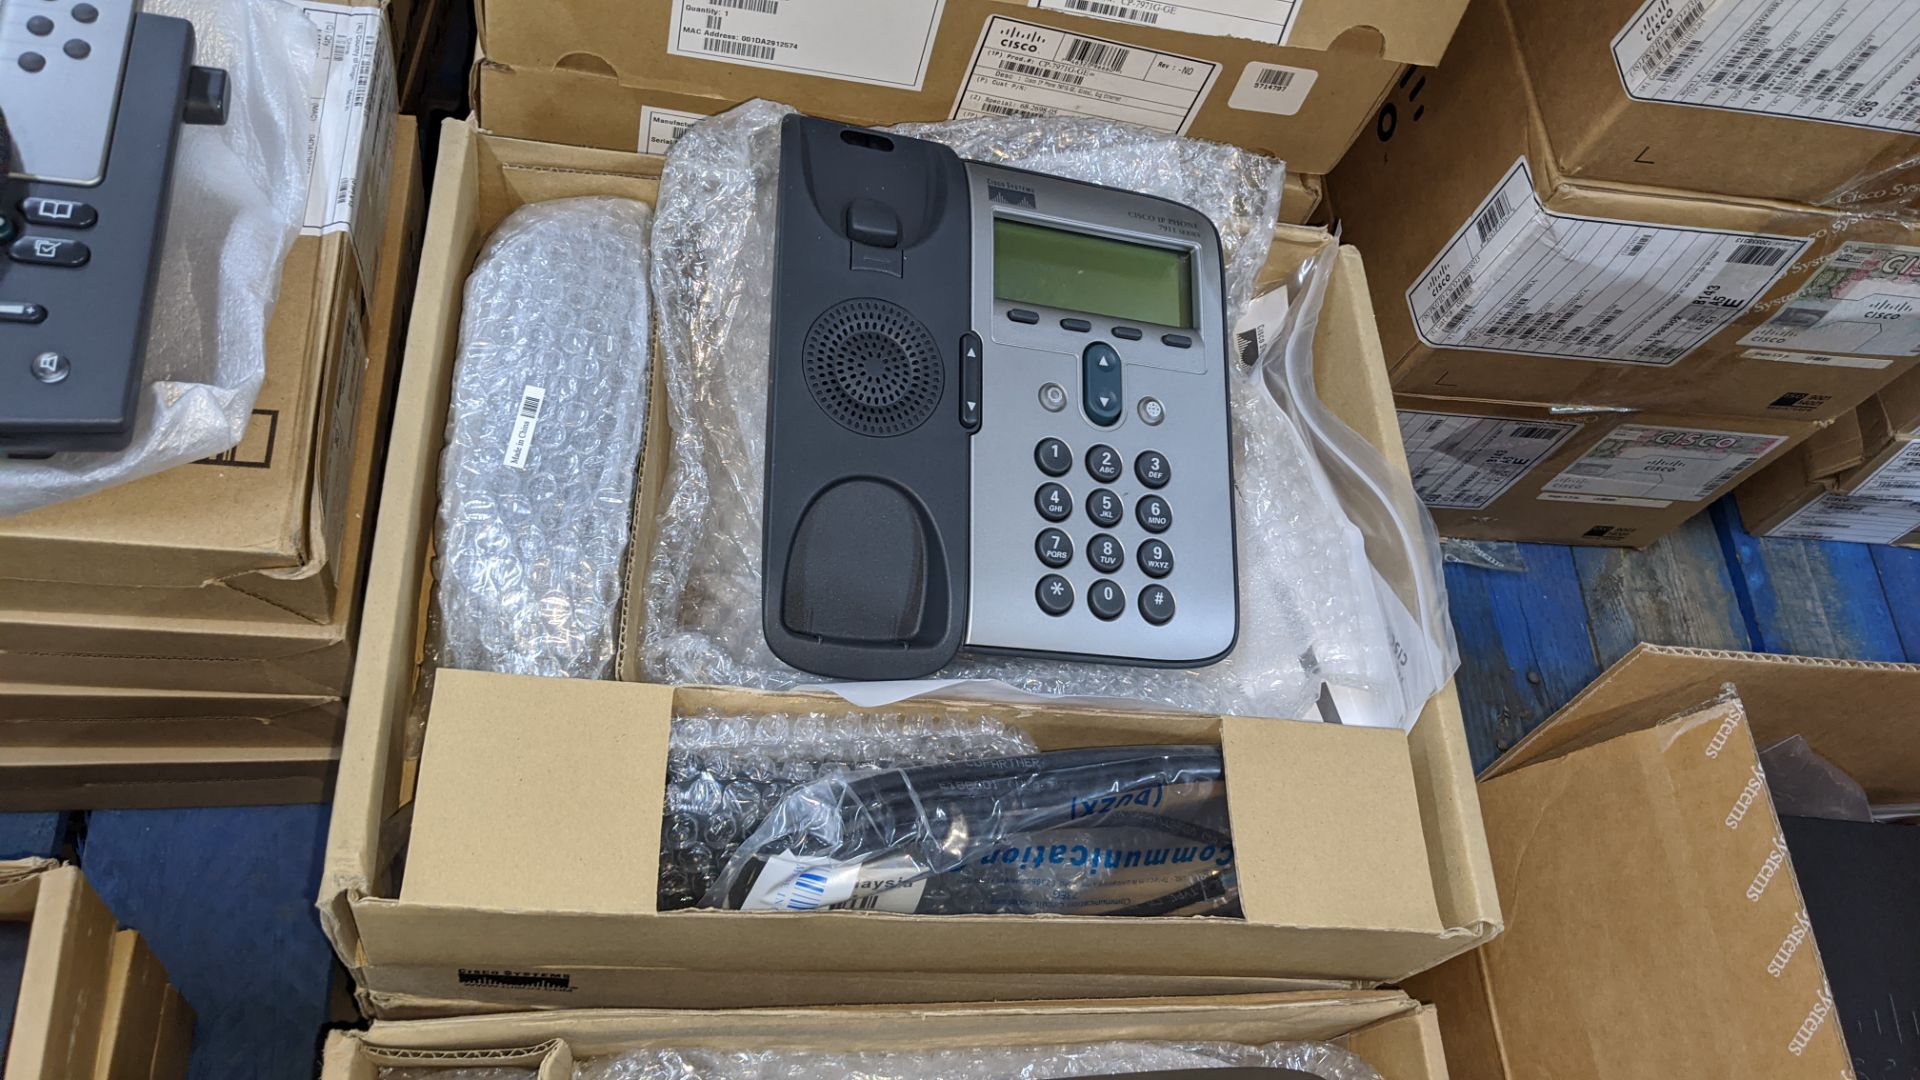 13 off Cisco handsets, model 7940, 7911 & 7971. Appear to be new & unused in Cisco branded boxes - Image 4 of 6